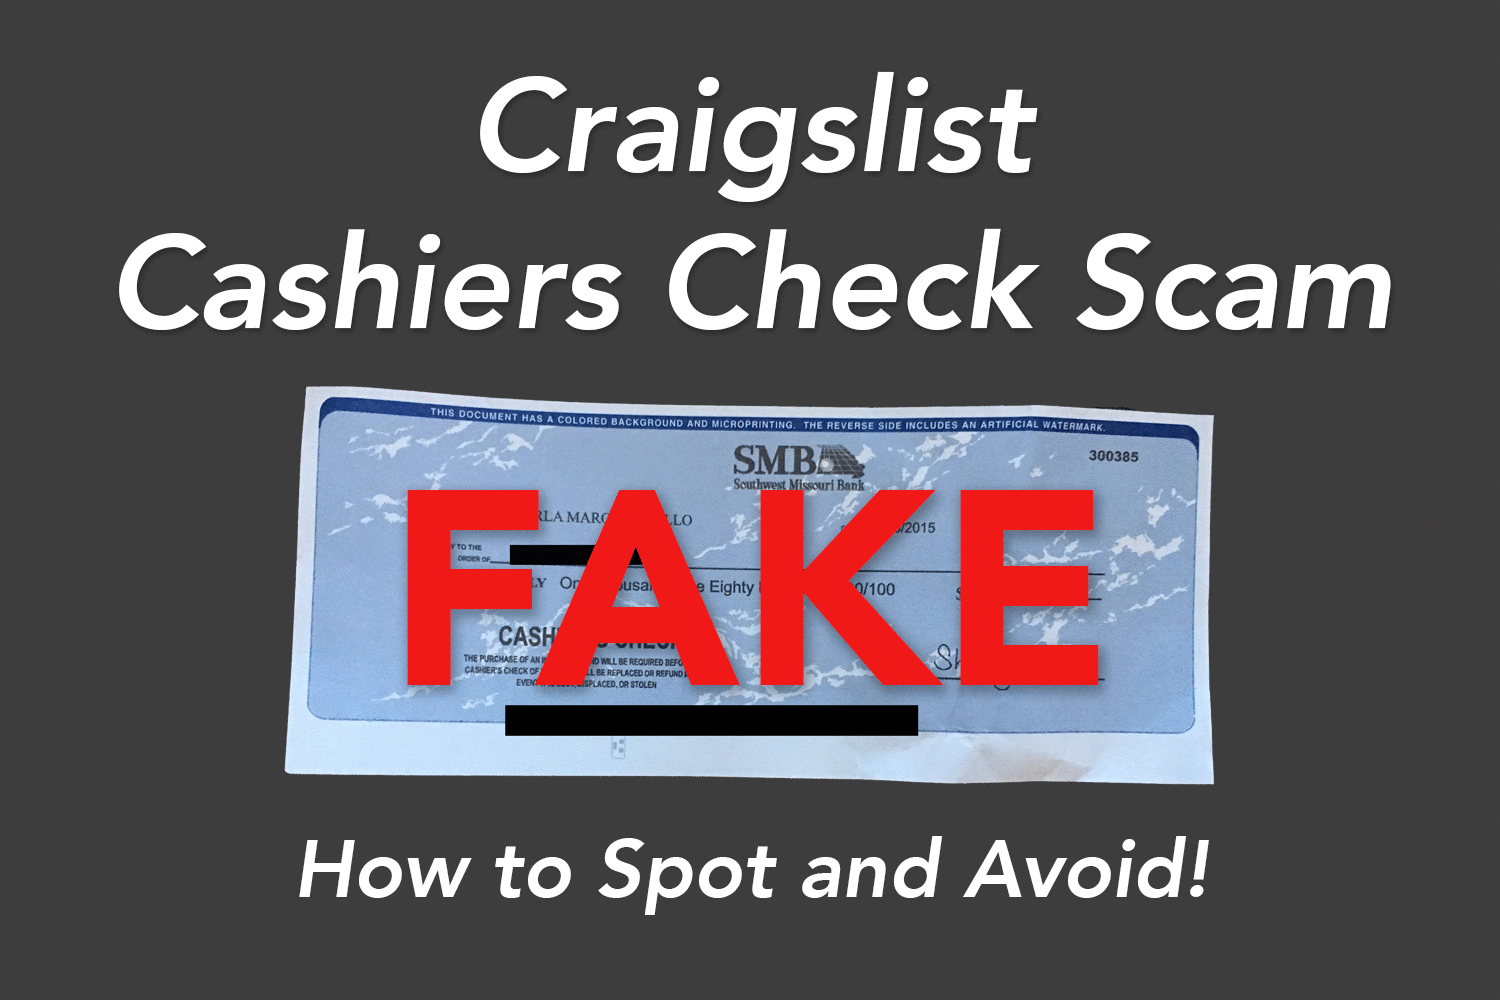 Craigslist Cashiers Check Scam – How to Spot and Avoid